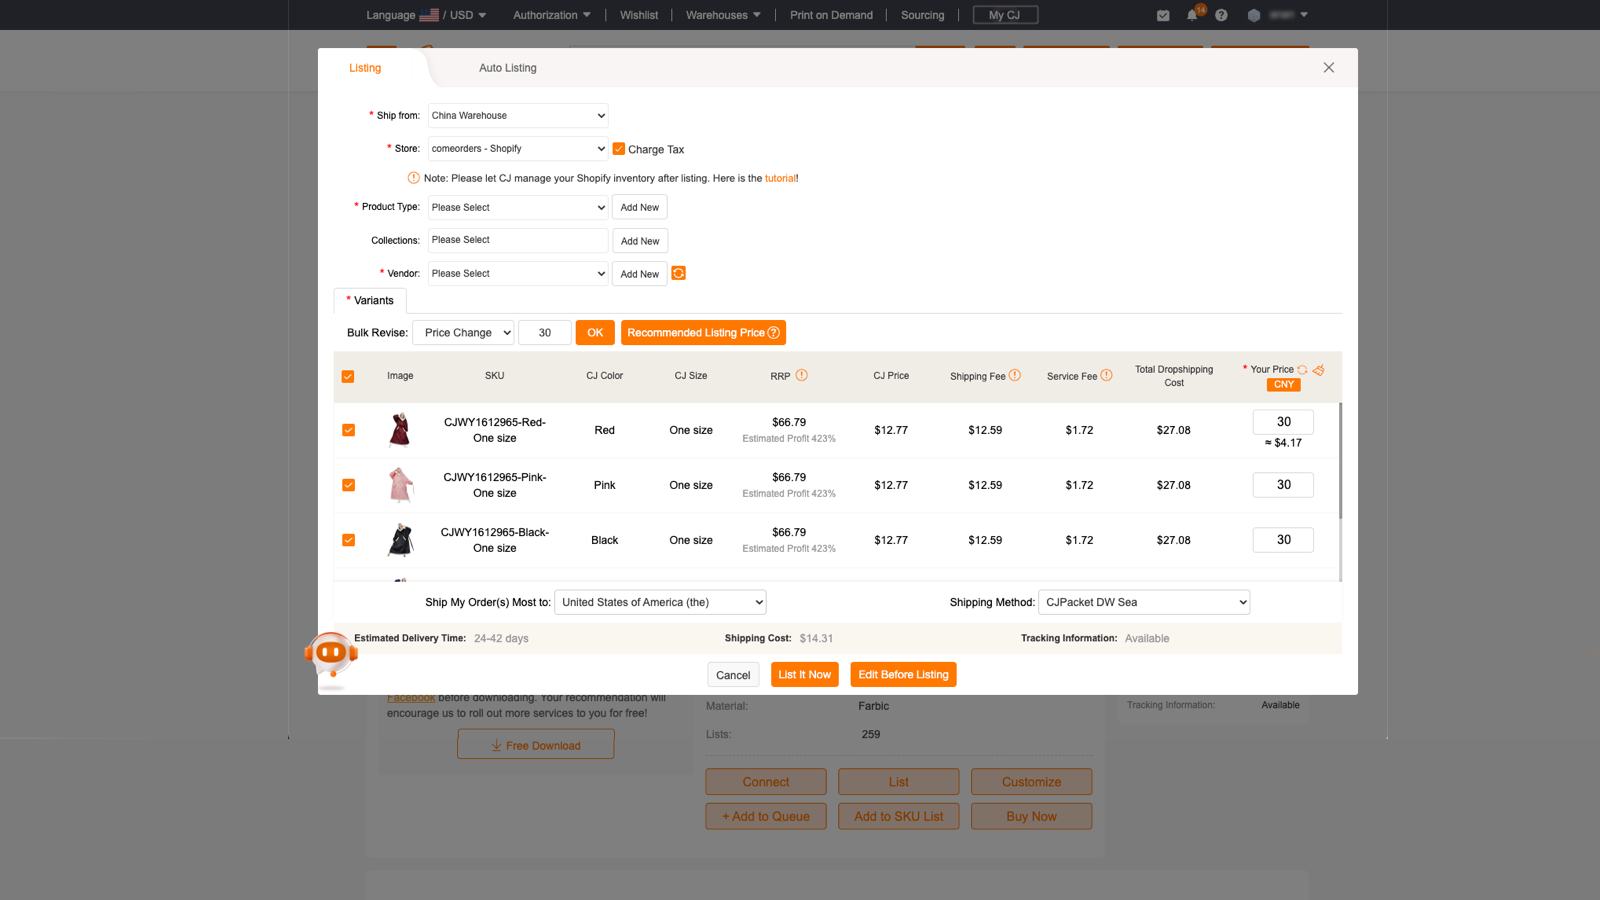 Estimate costs and list products to your stores.